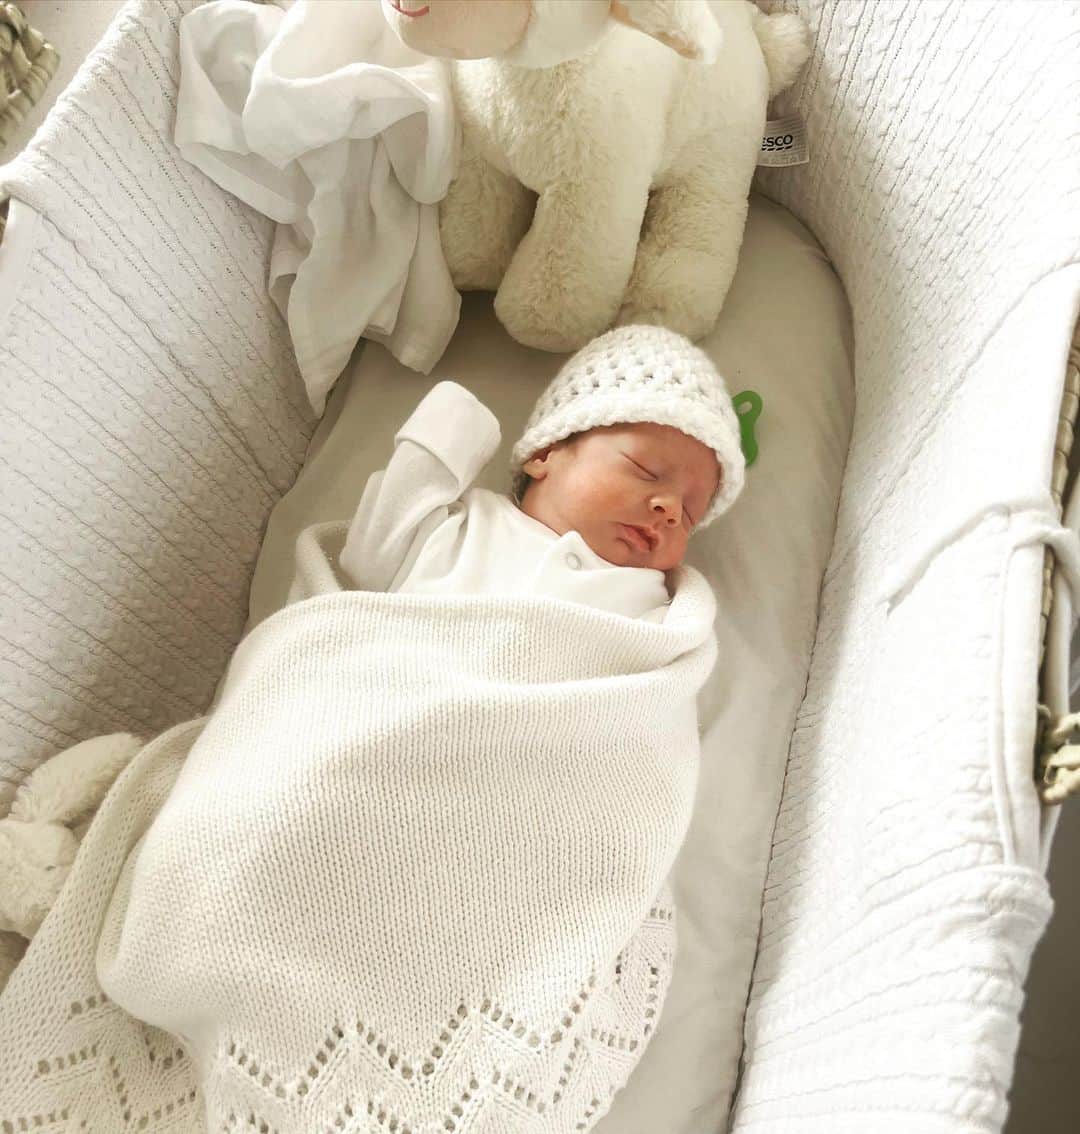 Jessica Wrightのインスタグラム：「Easter 2023 🤍 the day our Dustin came home. It’s been the longest road. This baby boy made his way into the world 12 weeks early & it’s been a very scary time for us all but most importantly, his mum & dad, who quite frankly have been nothing short of superheroes in my eyes how they have dealt with it. @joshwright4444 @holliekanewright congratulations & i am so proud of you both. You know how I feel about you both & our little dusty. Not forgetting our joshie boy. Love you all & I can’t wait to spend many more Easter’s with our little brave warrior & his big brother & cousin 🤍」